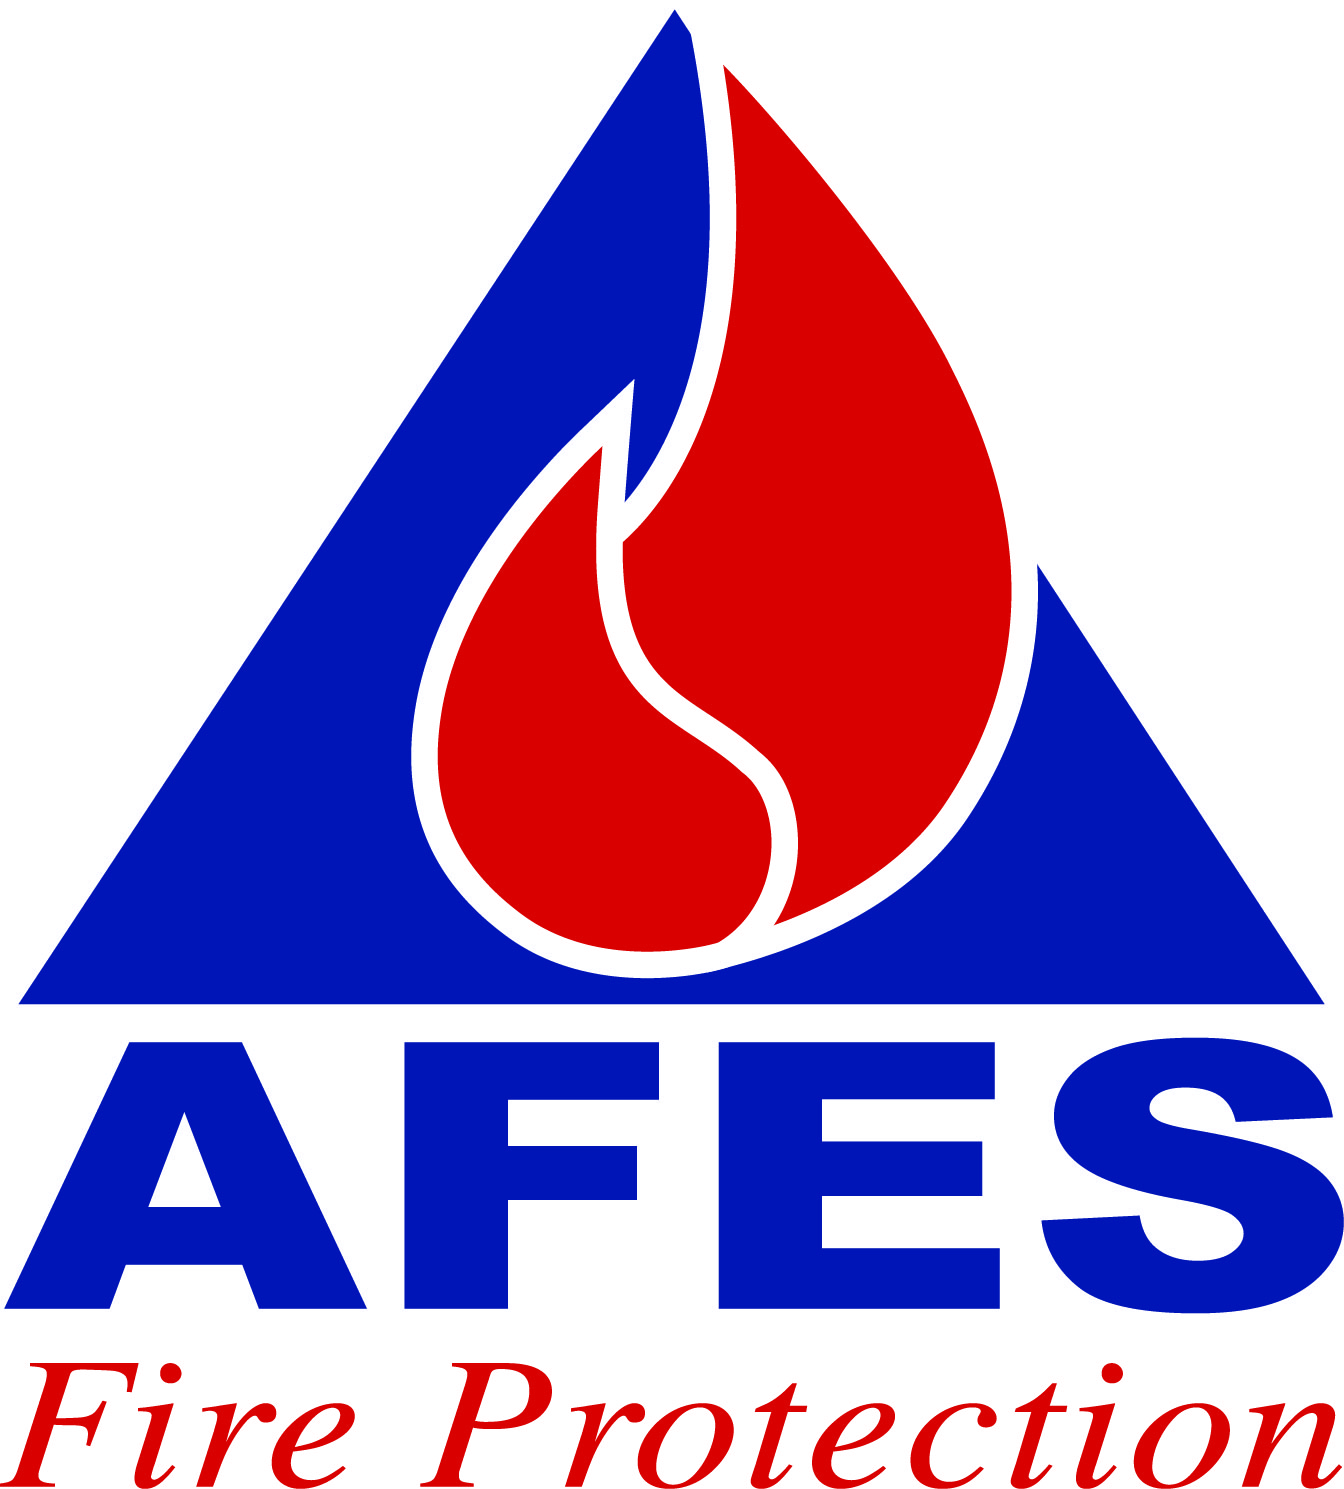 All Fire & Evacuation Systems